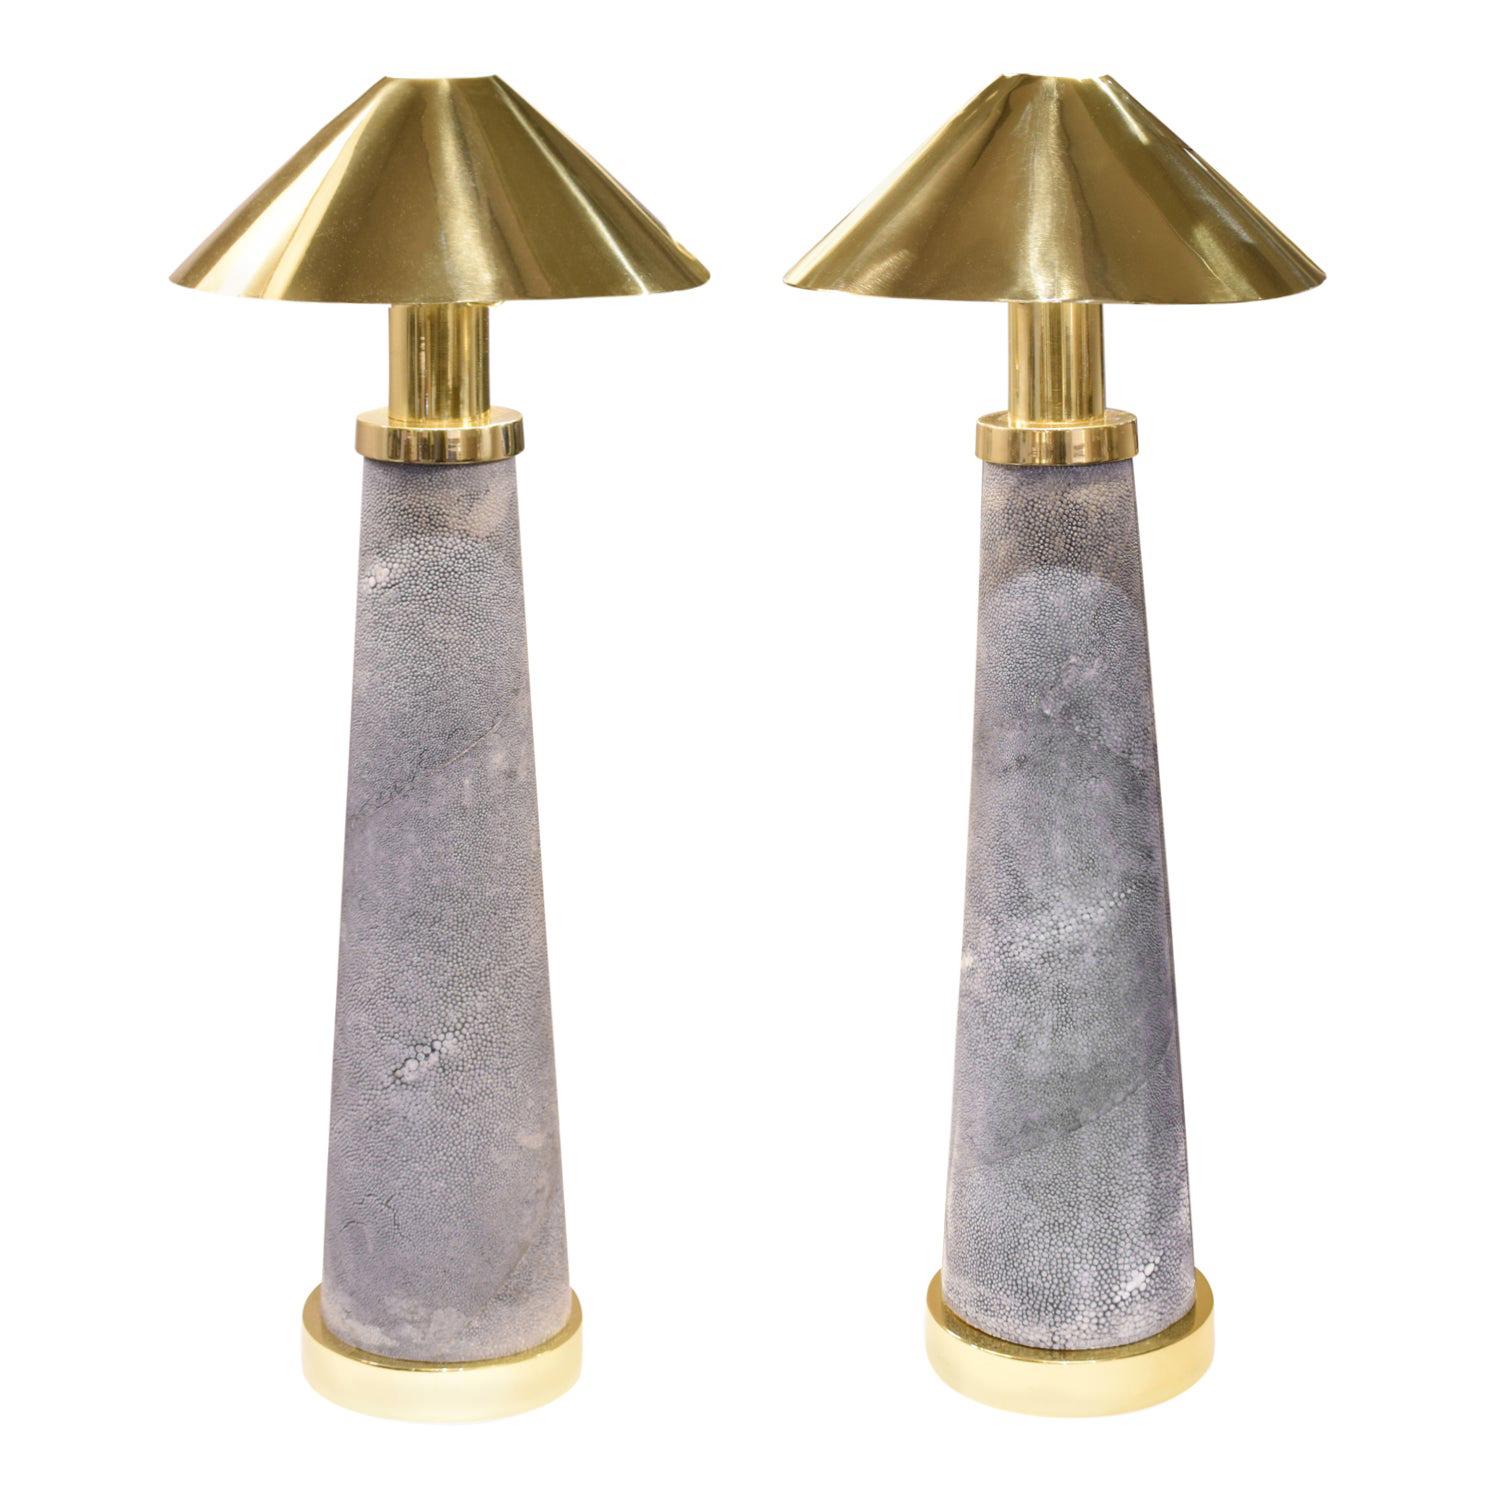 Karl Springer Rare Pair of "Lighthouse Lamps" in Shagreen and Brass, 1980s